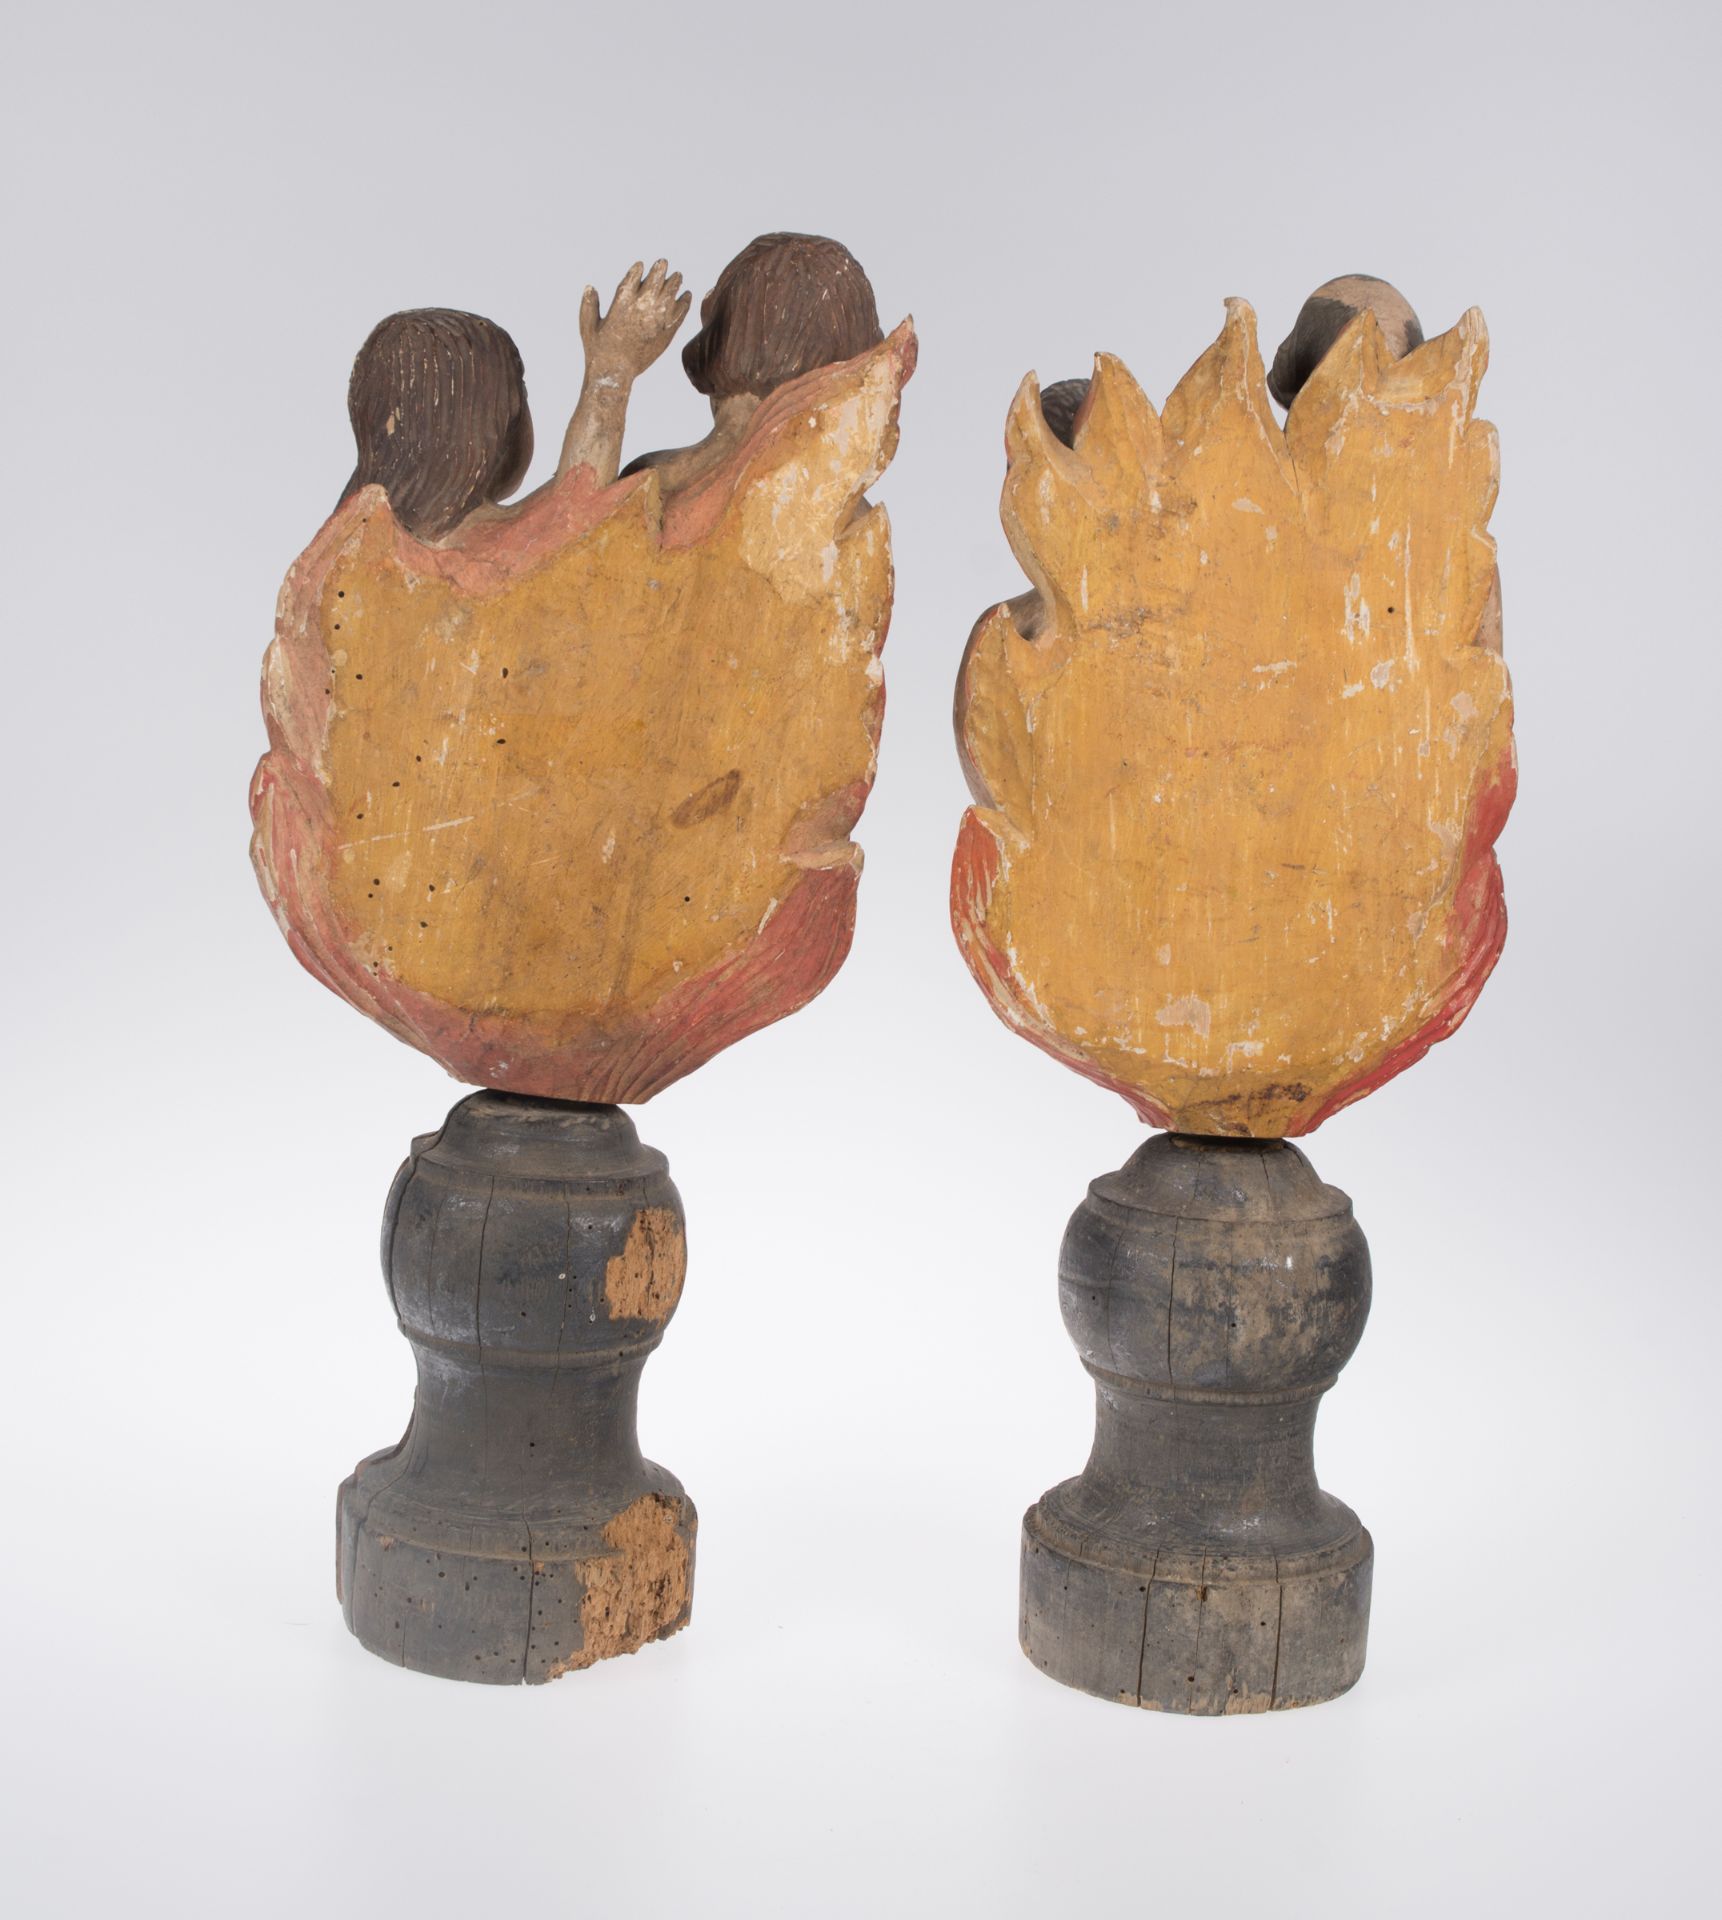 "Souls in Purgatory". Pair of carved and polychromed wooden sculptures. 17th century. - Image 2 of 2